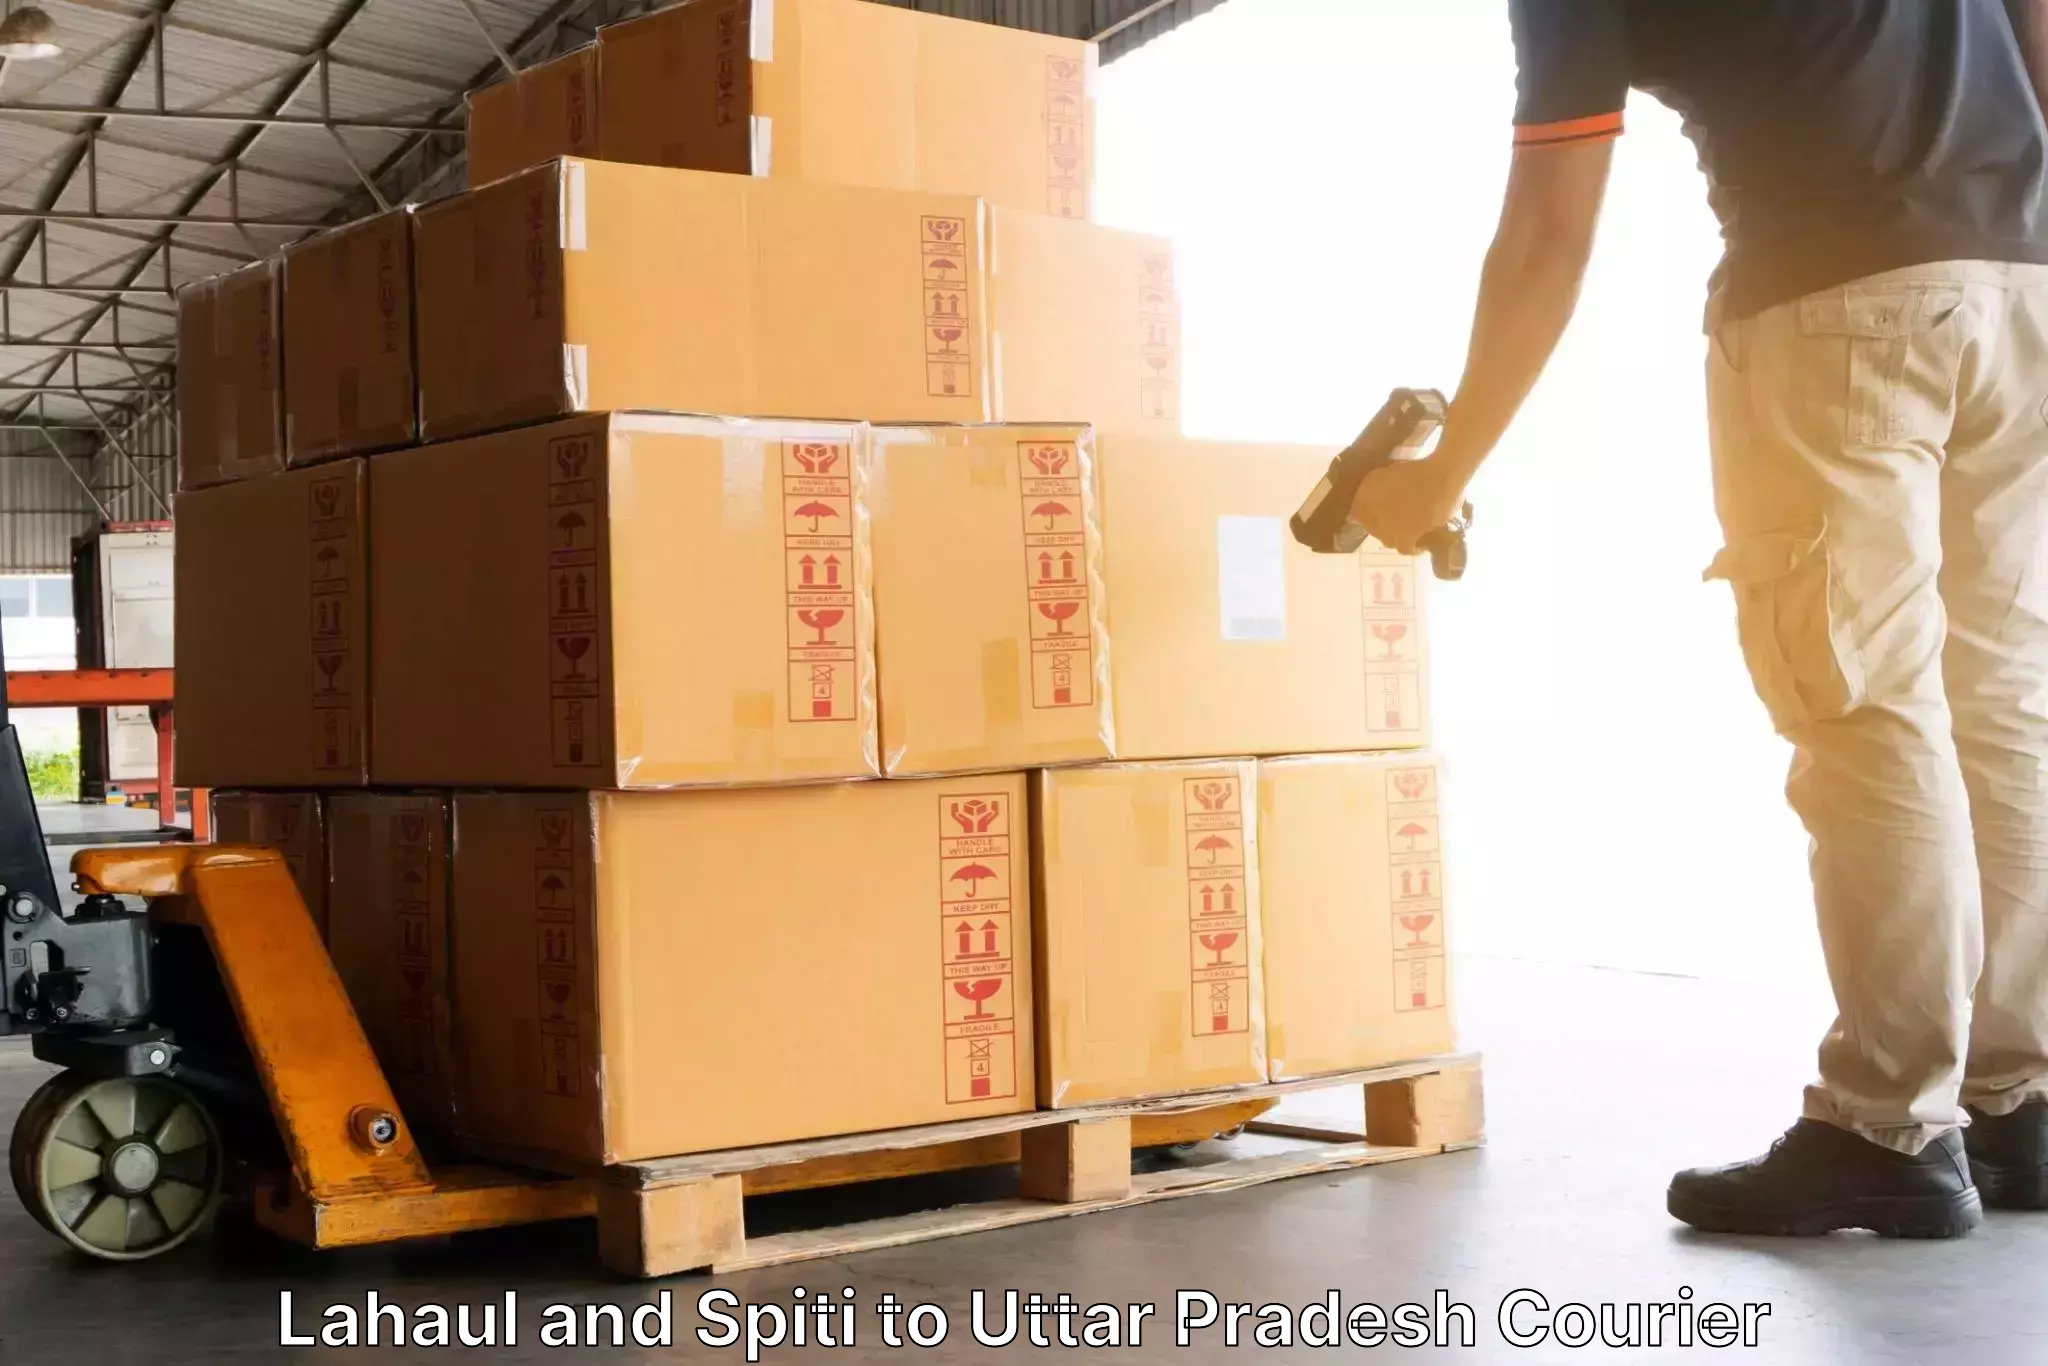 24/7 courier service Lahaul and Spiti to Baghpat